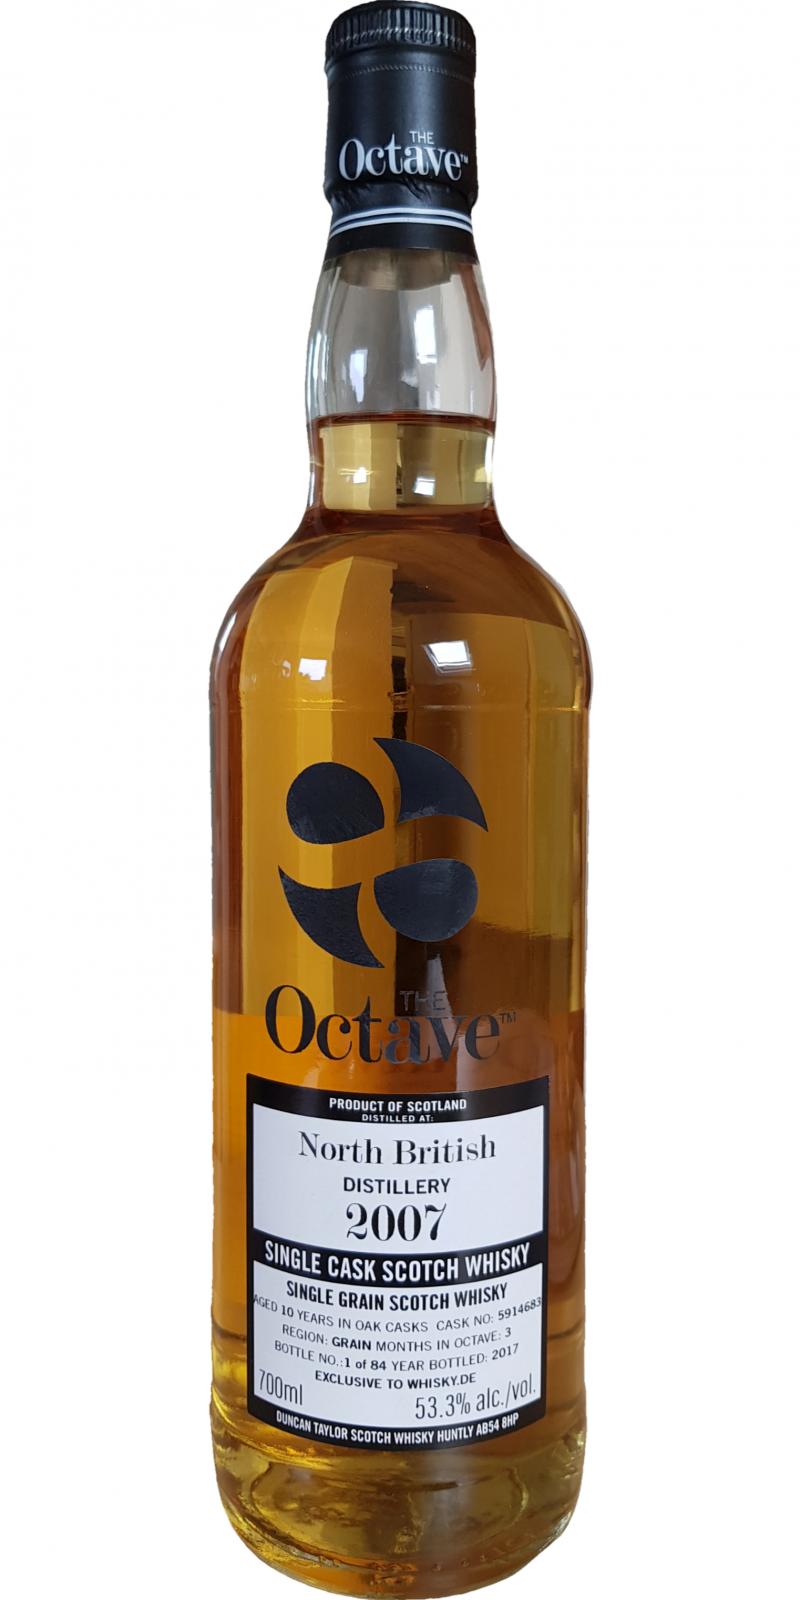 North British 2007 DT The Octave #5914683 whisky.de Exclusive 53.3% 700ml